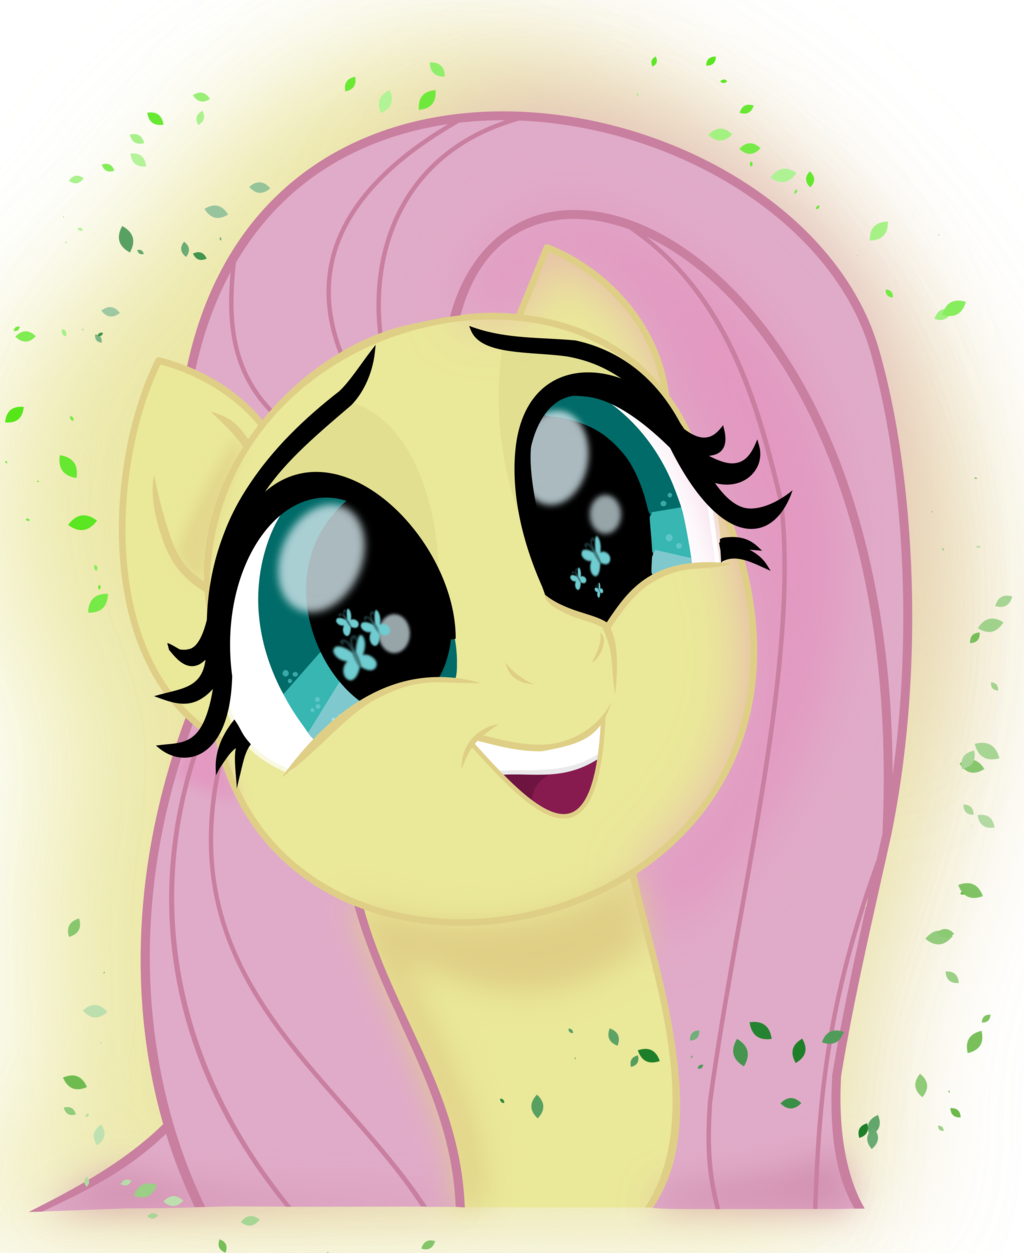 fluttershy__mlp_the_movie__by_starlythegreat-dbpx87c.png